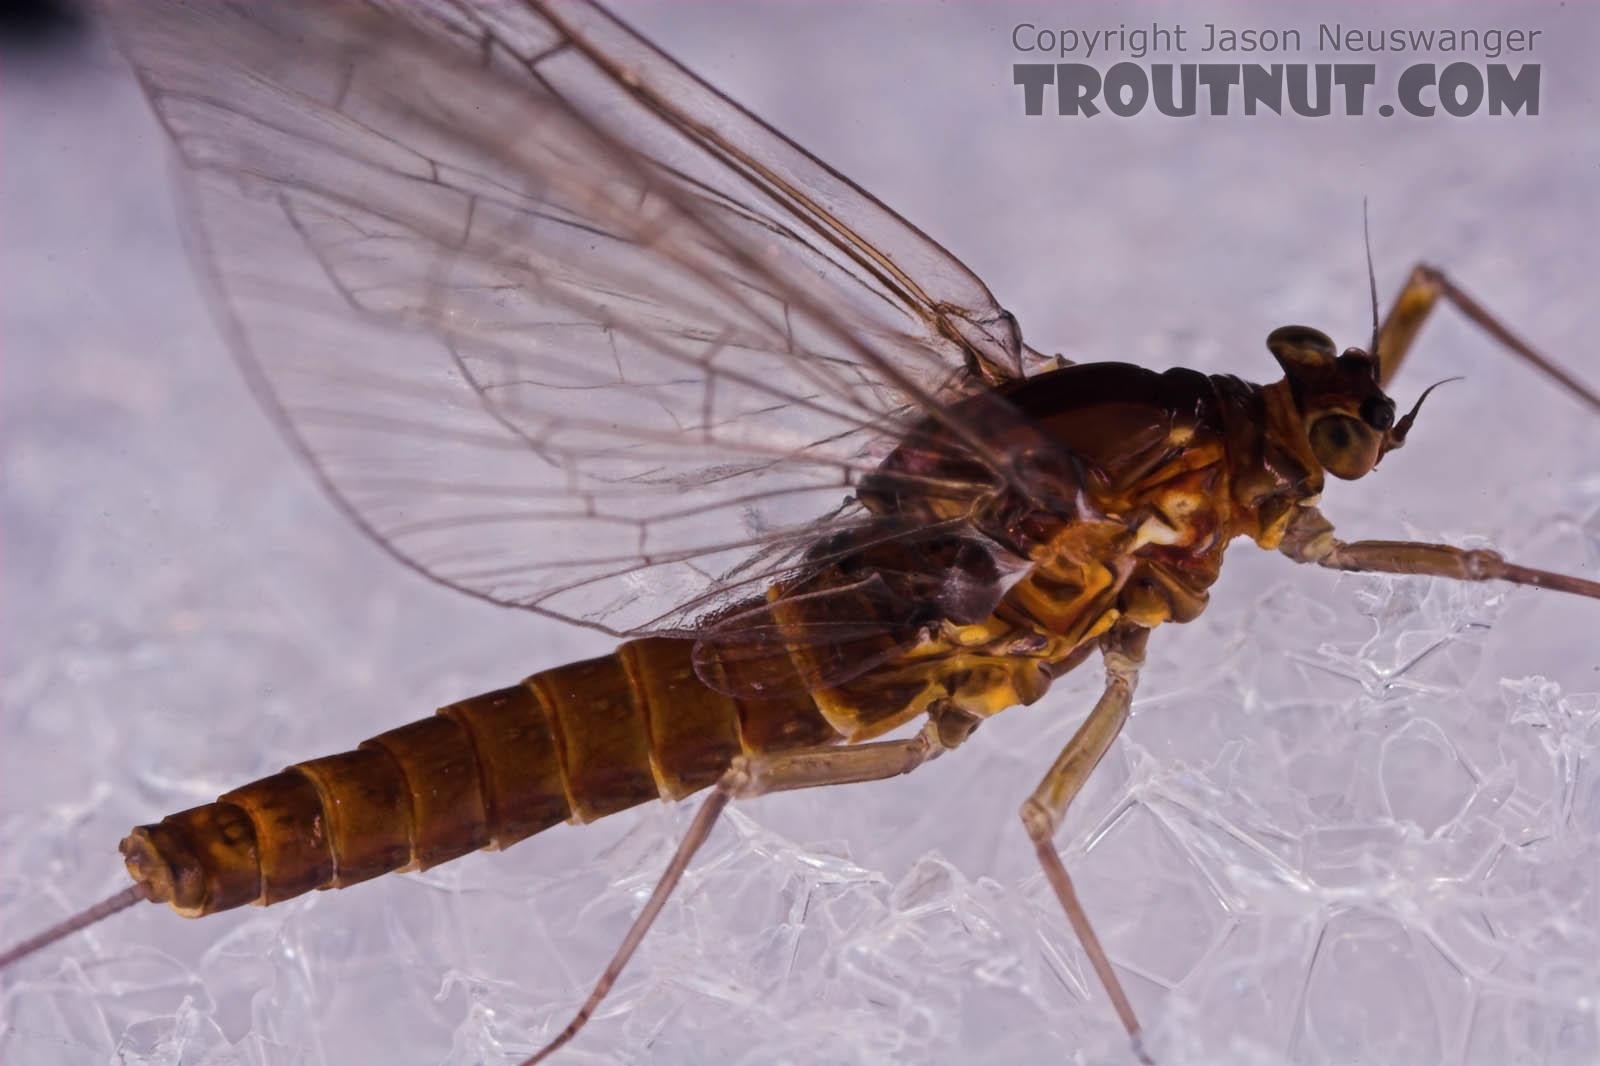 Female Baetis (Blue-Winged Olives) Mayfly Spinner from Mongaup Creek in New York